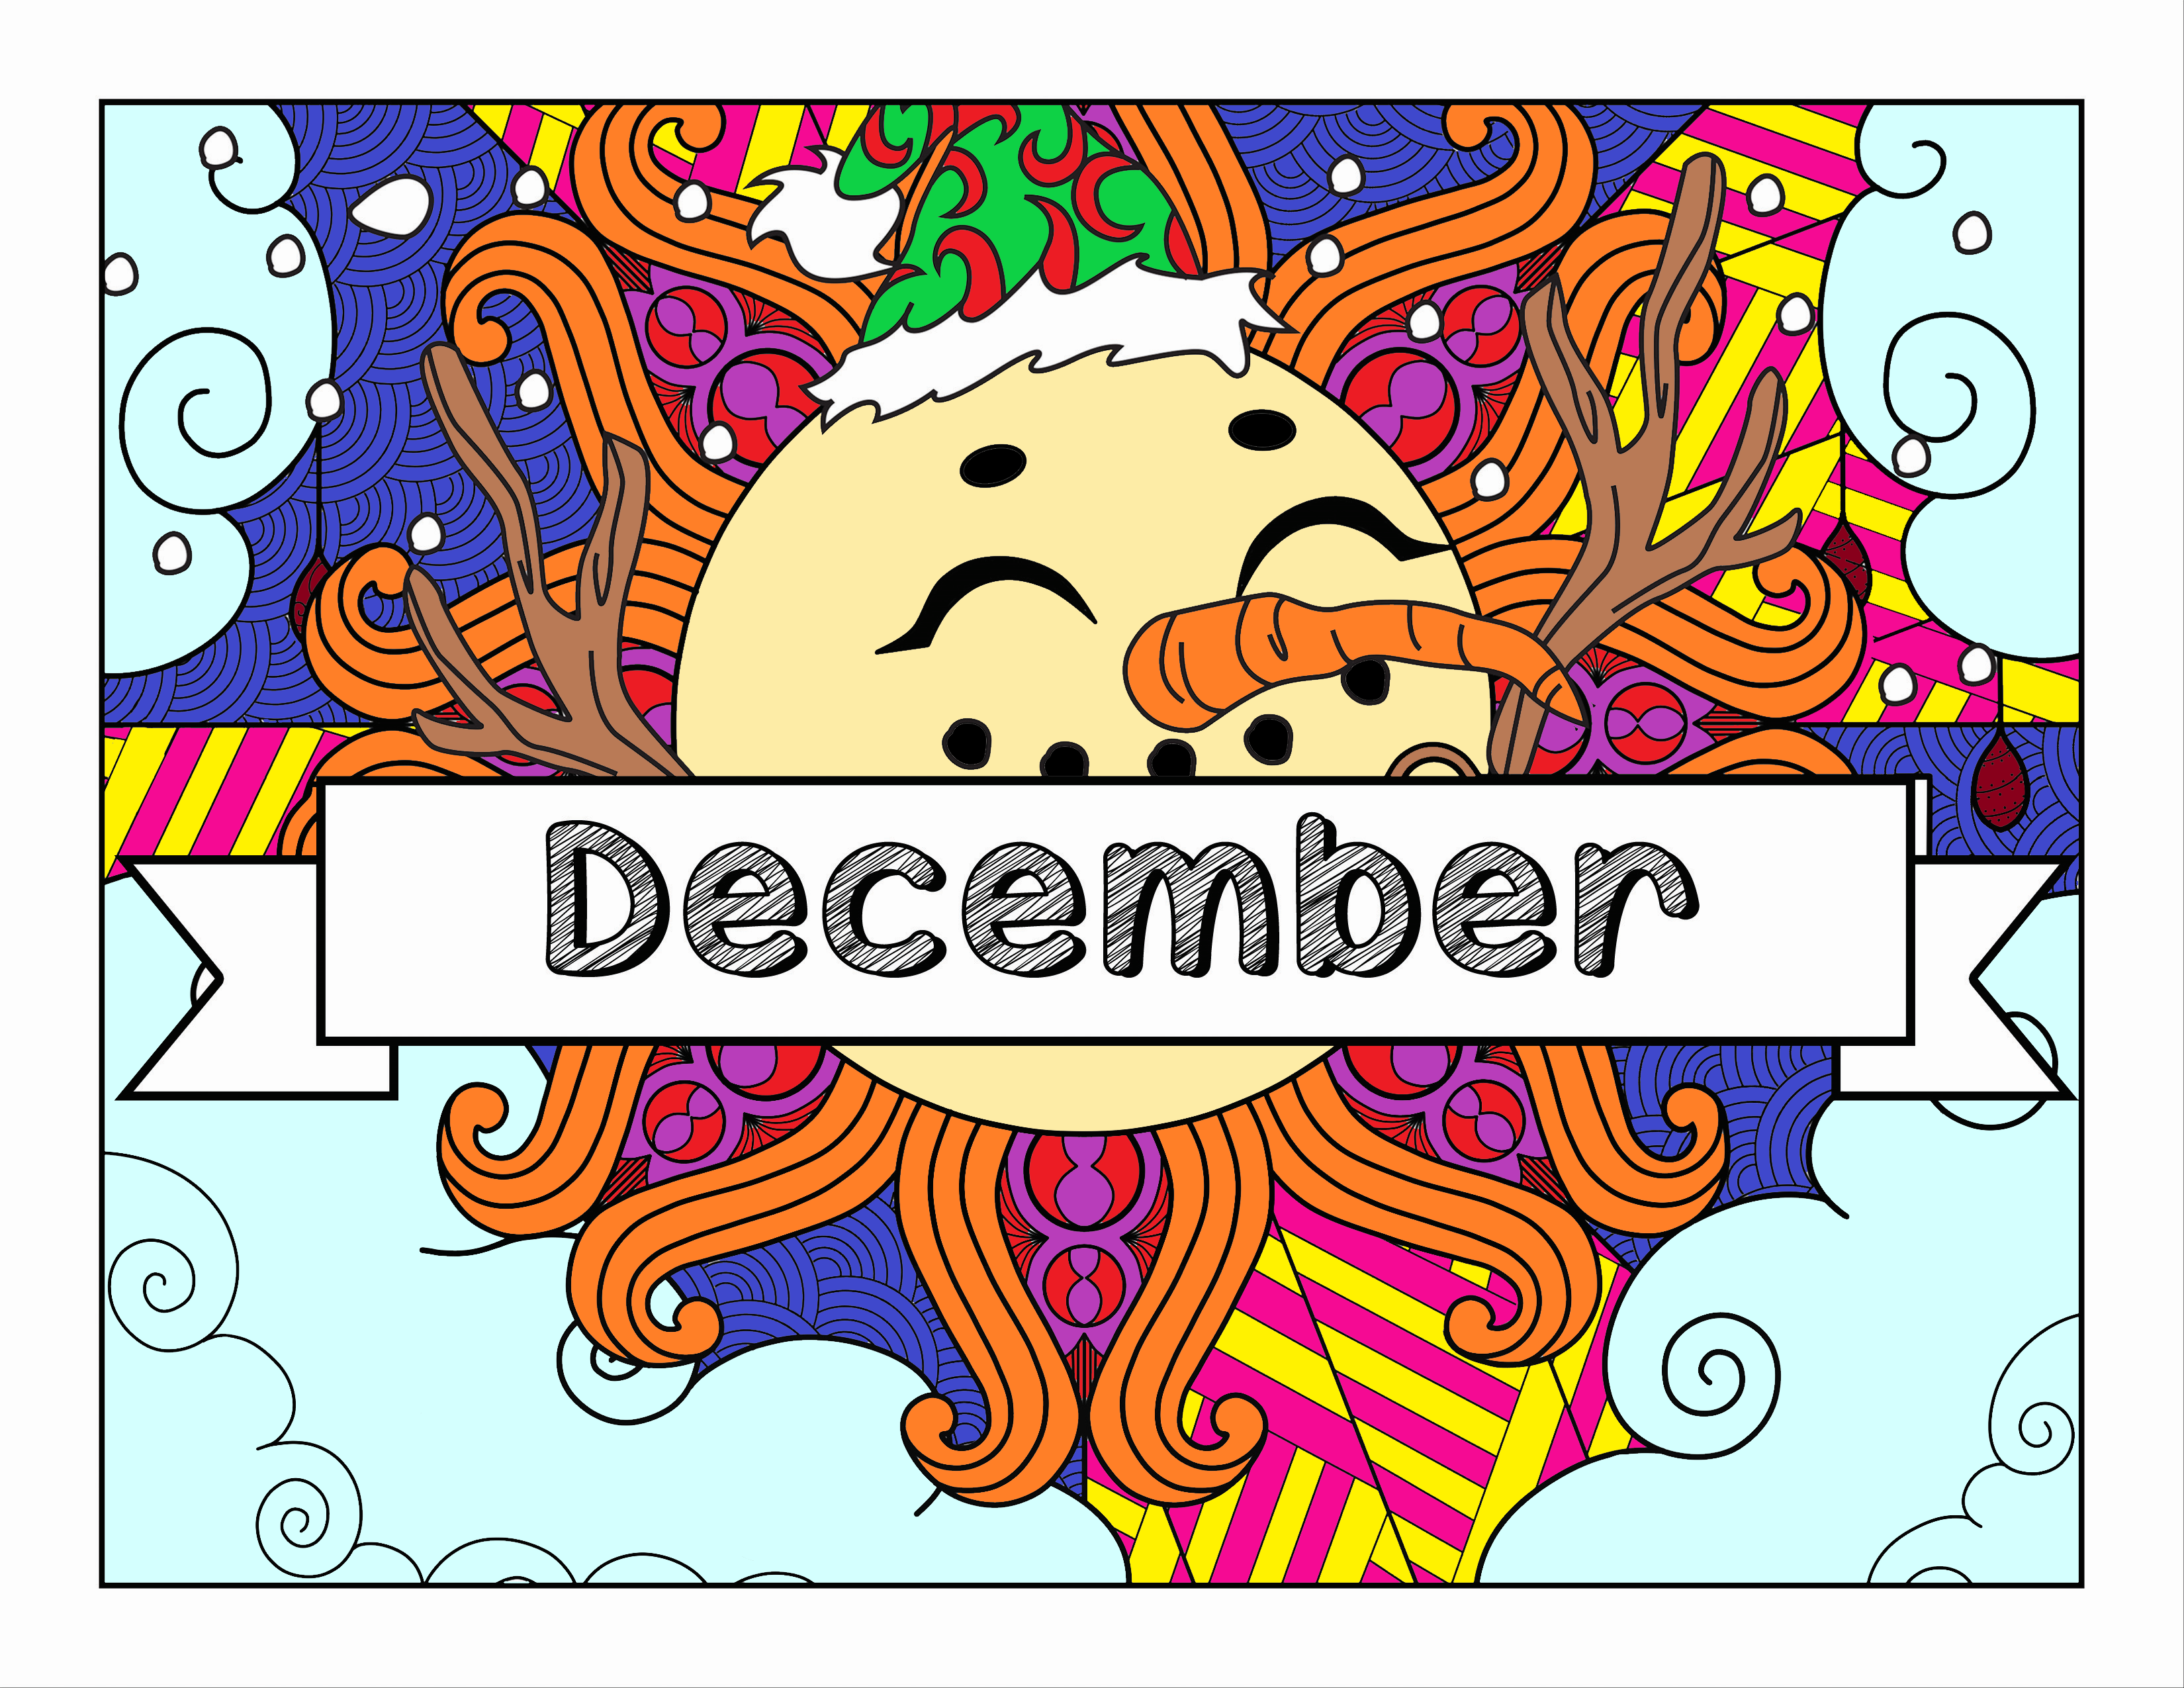 December and Winter Christmas-Themed Coloring Book and Planner, Mandalas - 33-Page Printable Digital PDF for Adults and Children